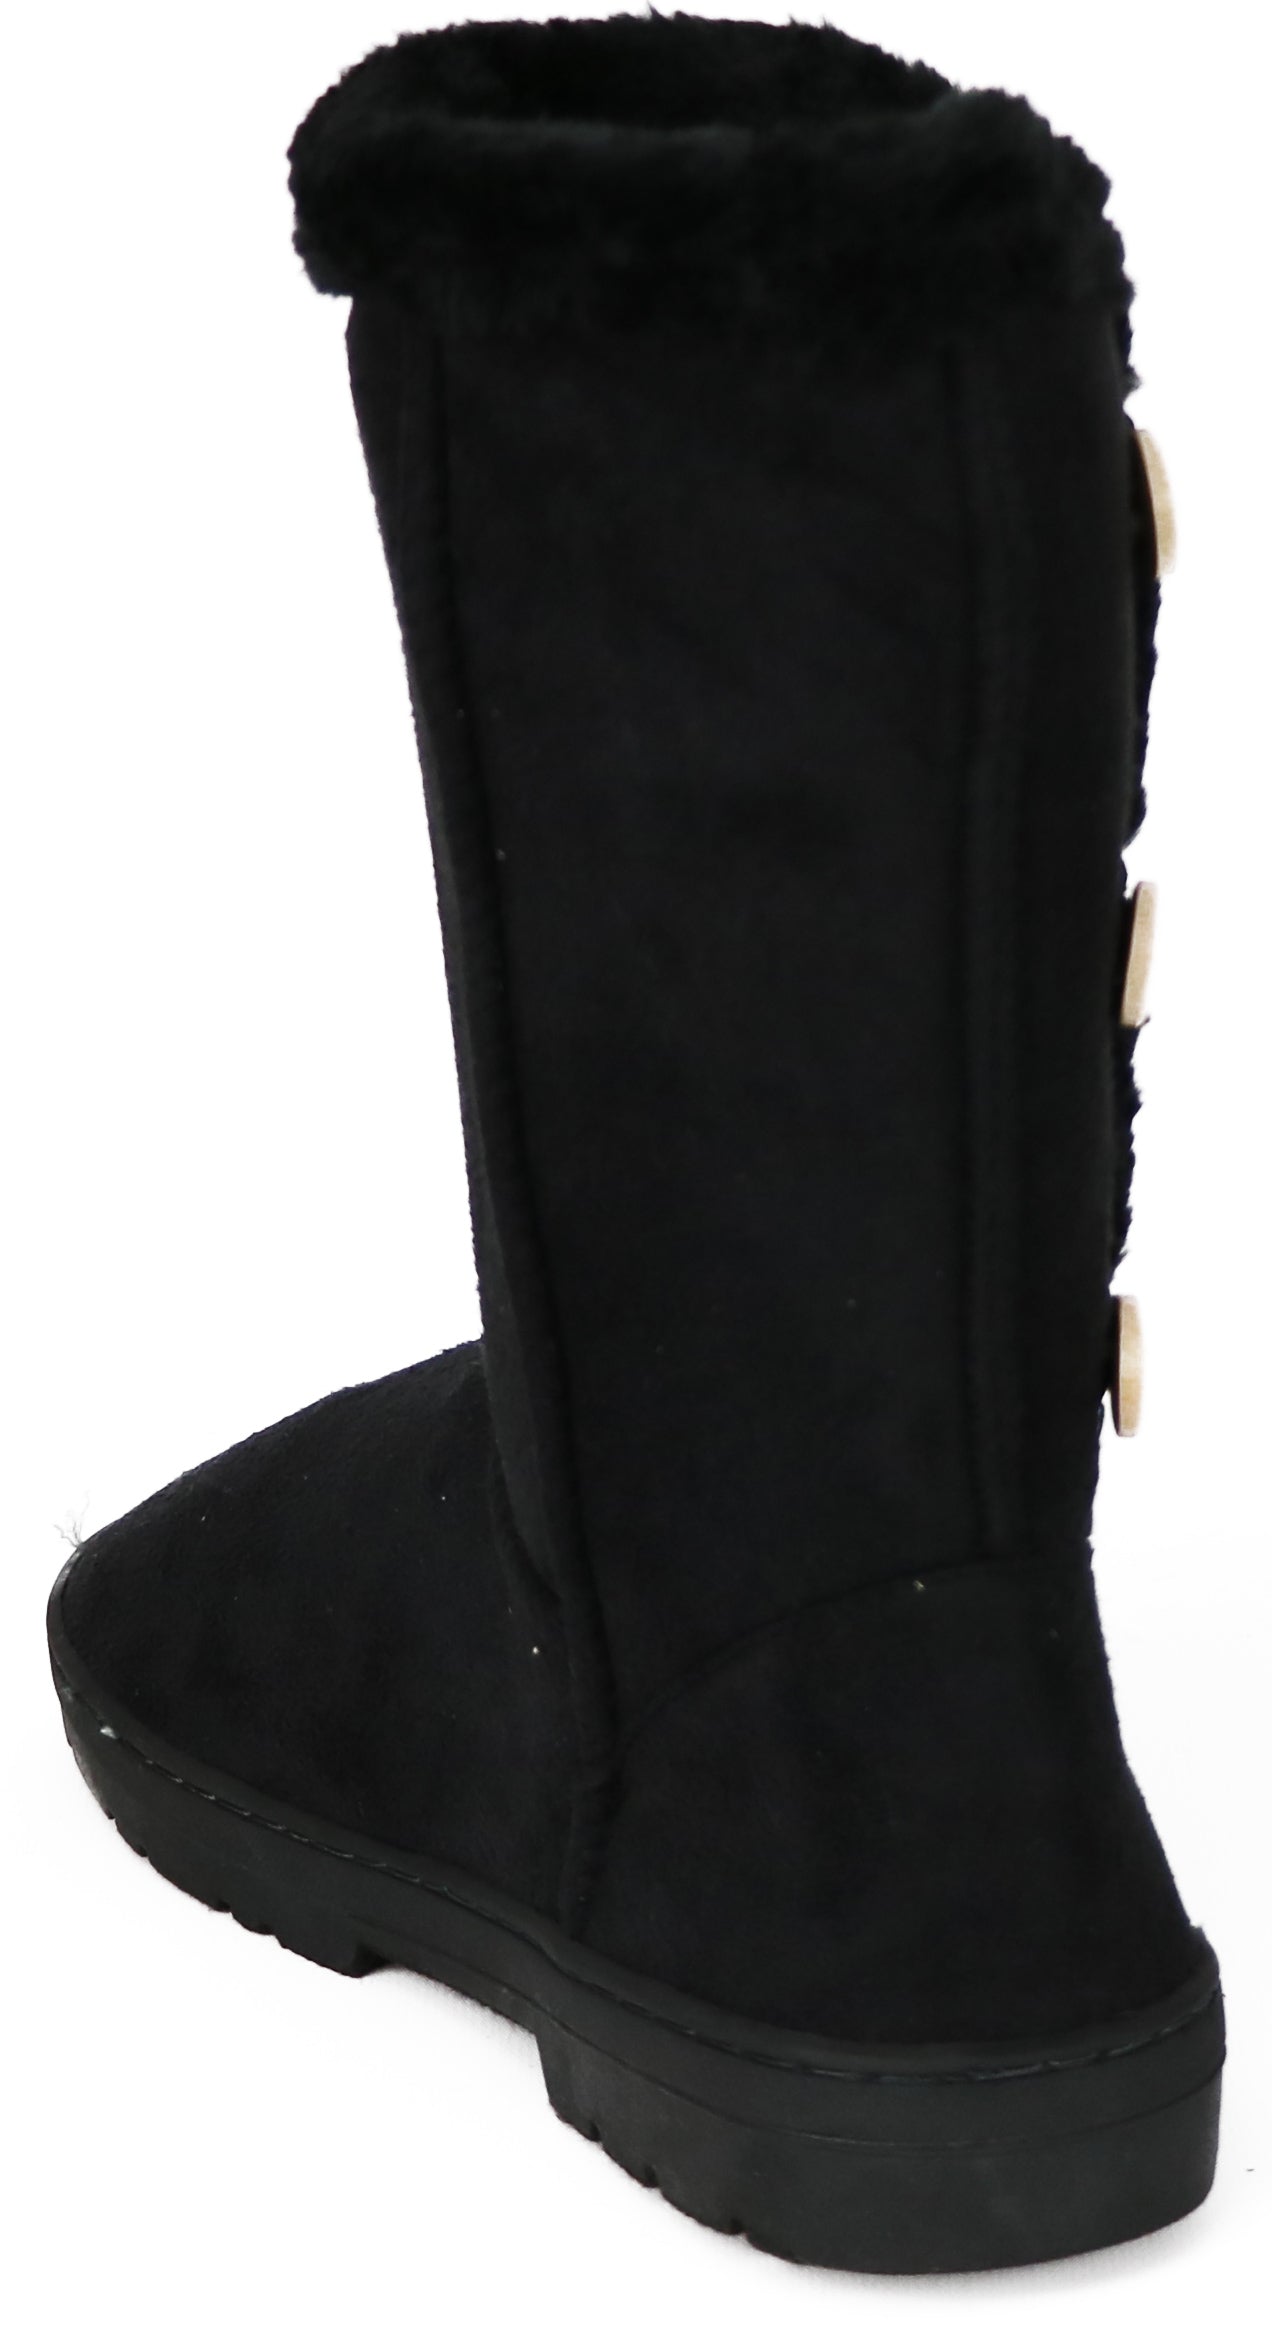 Chatz Womens Microsuede Button Boots